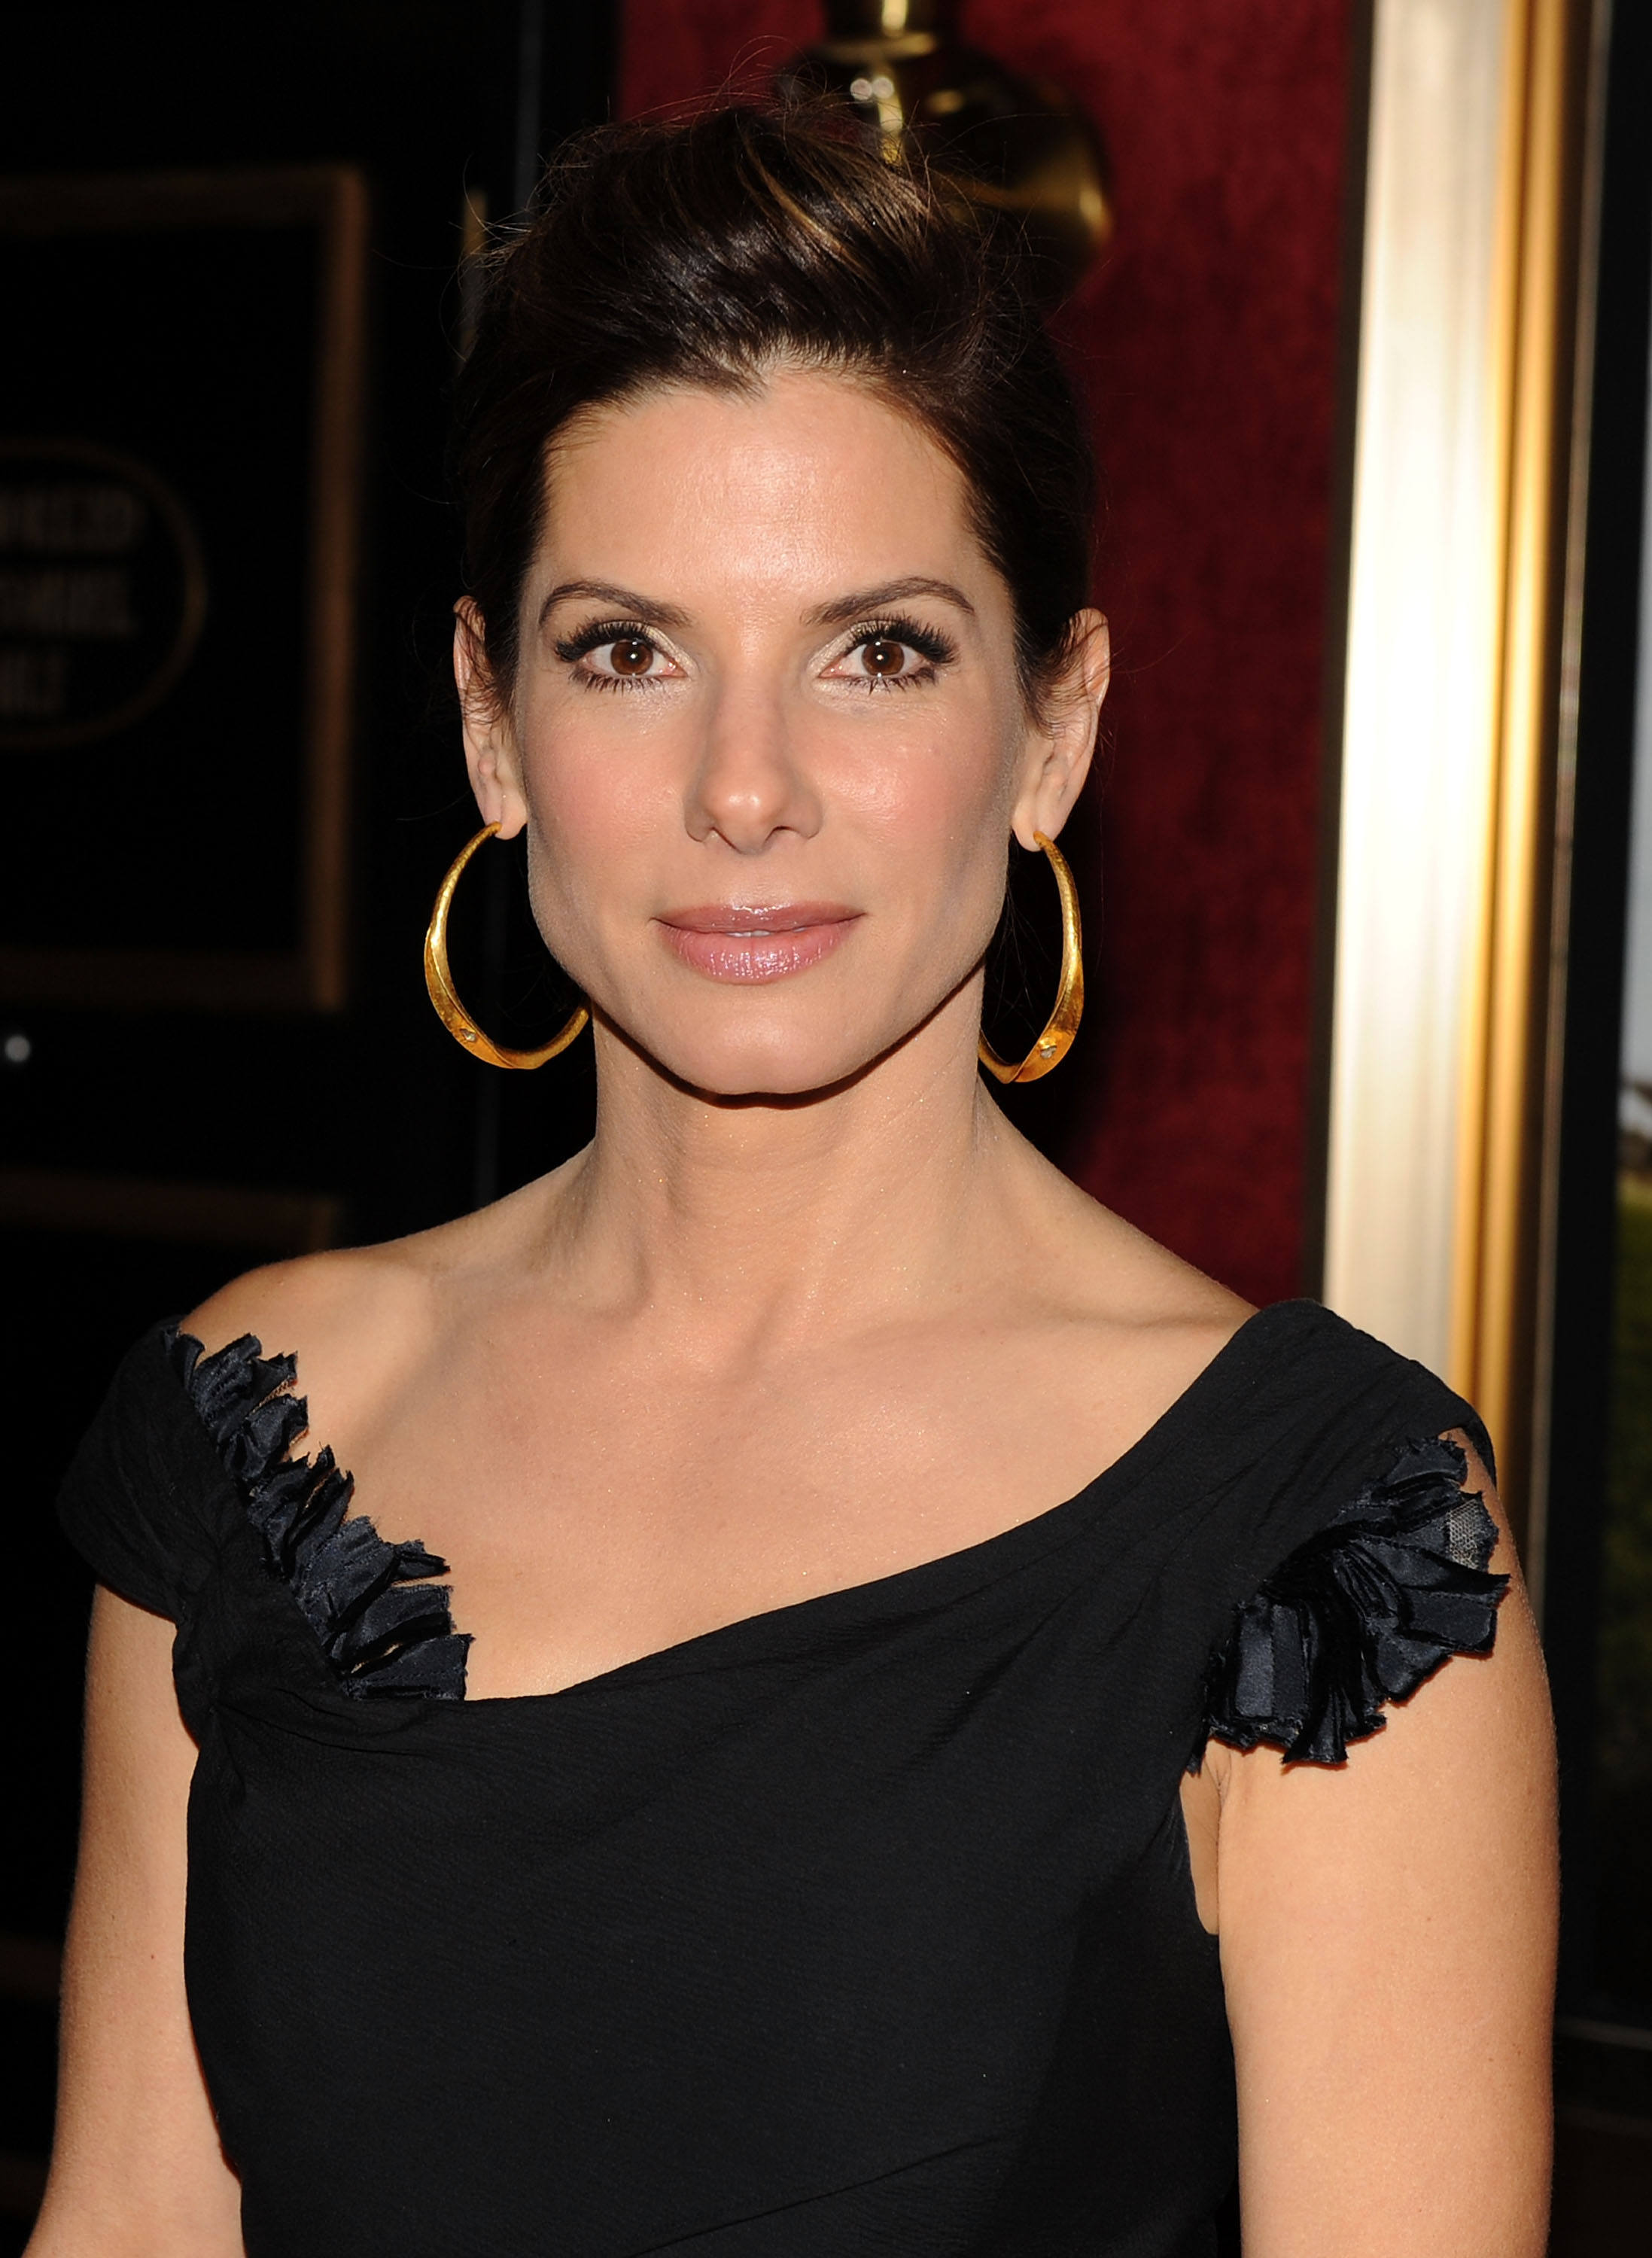 Sandra Bullock at "The Blind Side" premiere in New York City, 2009 | Source: Getty Images